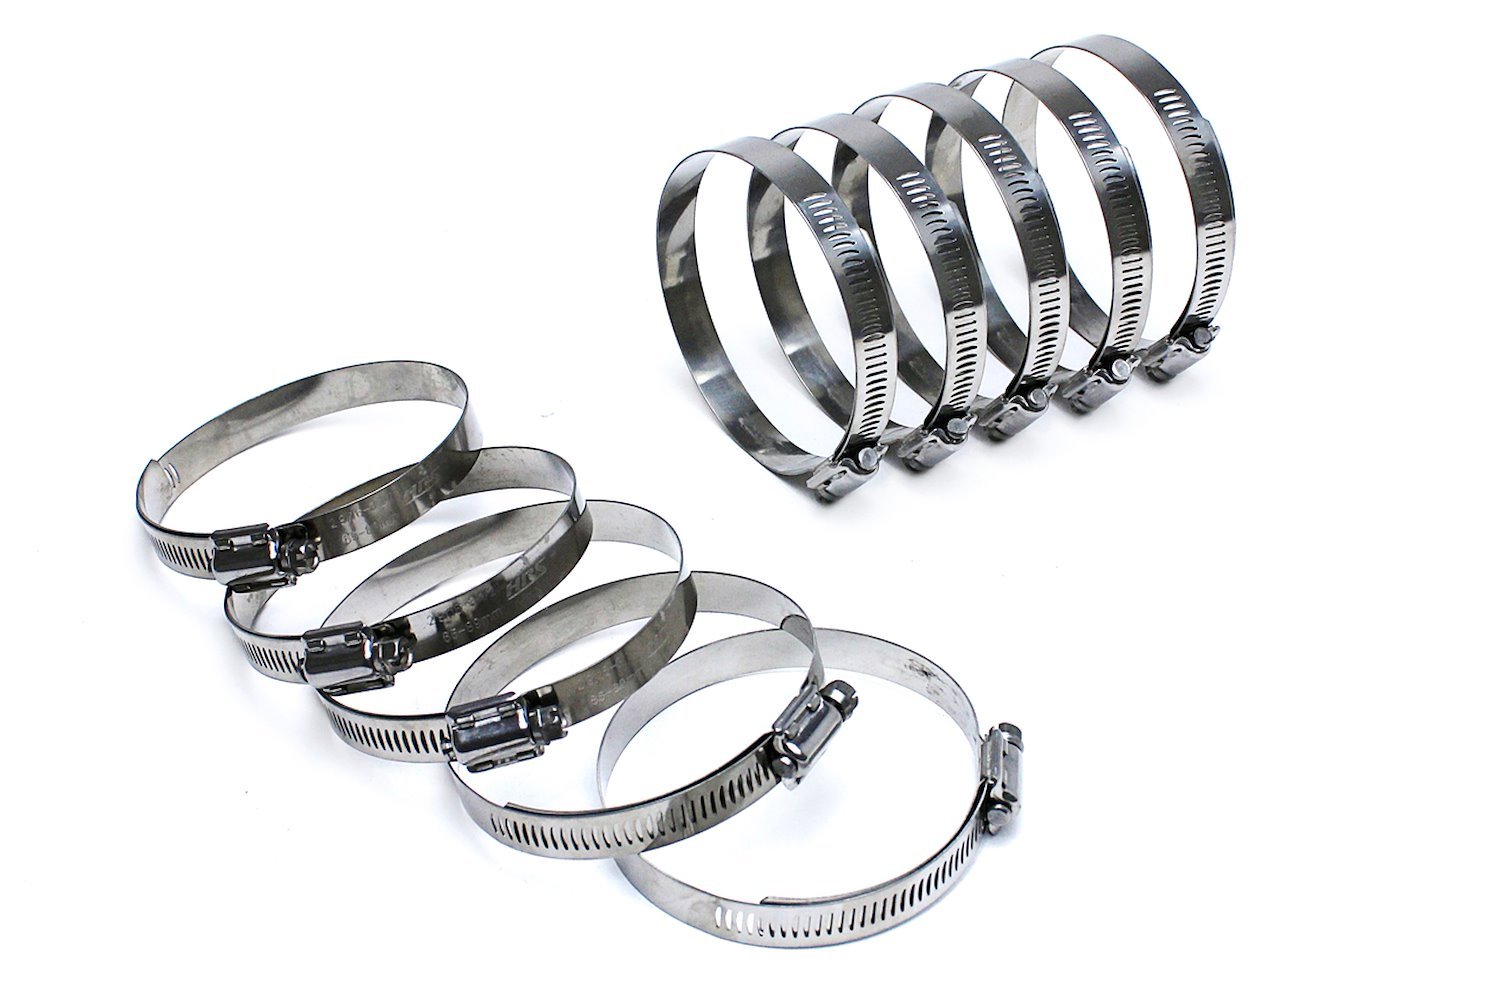 SSWC-84-108x10 Stainless Steel Worm Gear Hose Clamp, Effective Range: 3-5/16 in.- 4-1/4 in., 10Pc